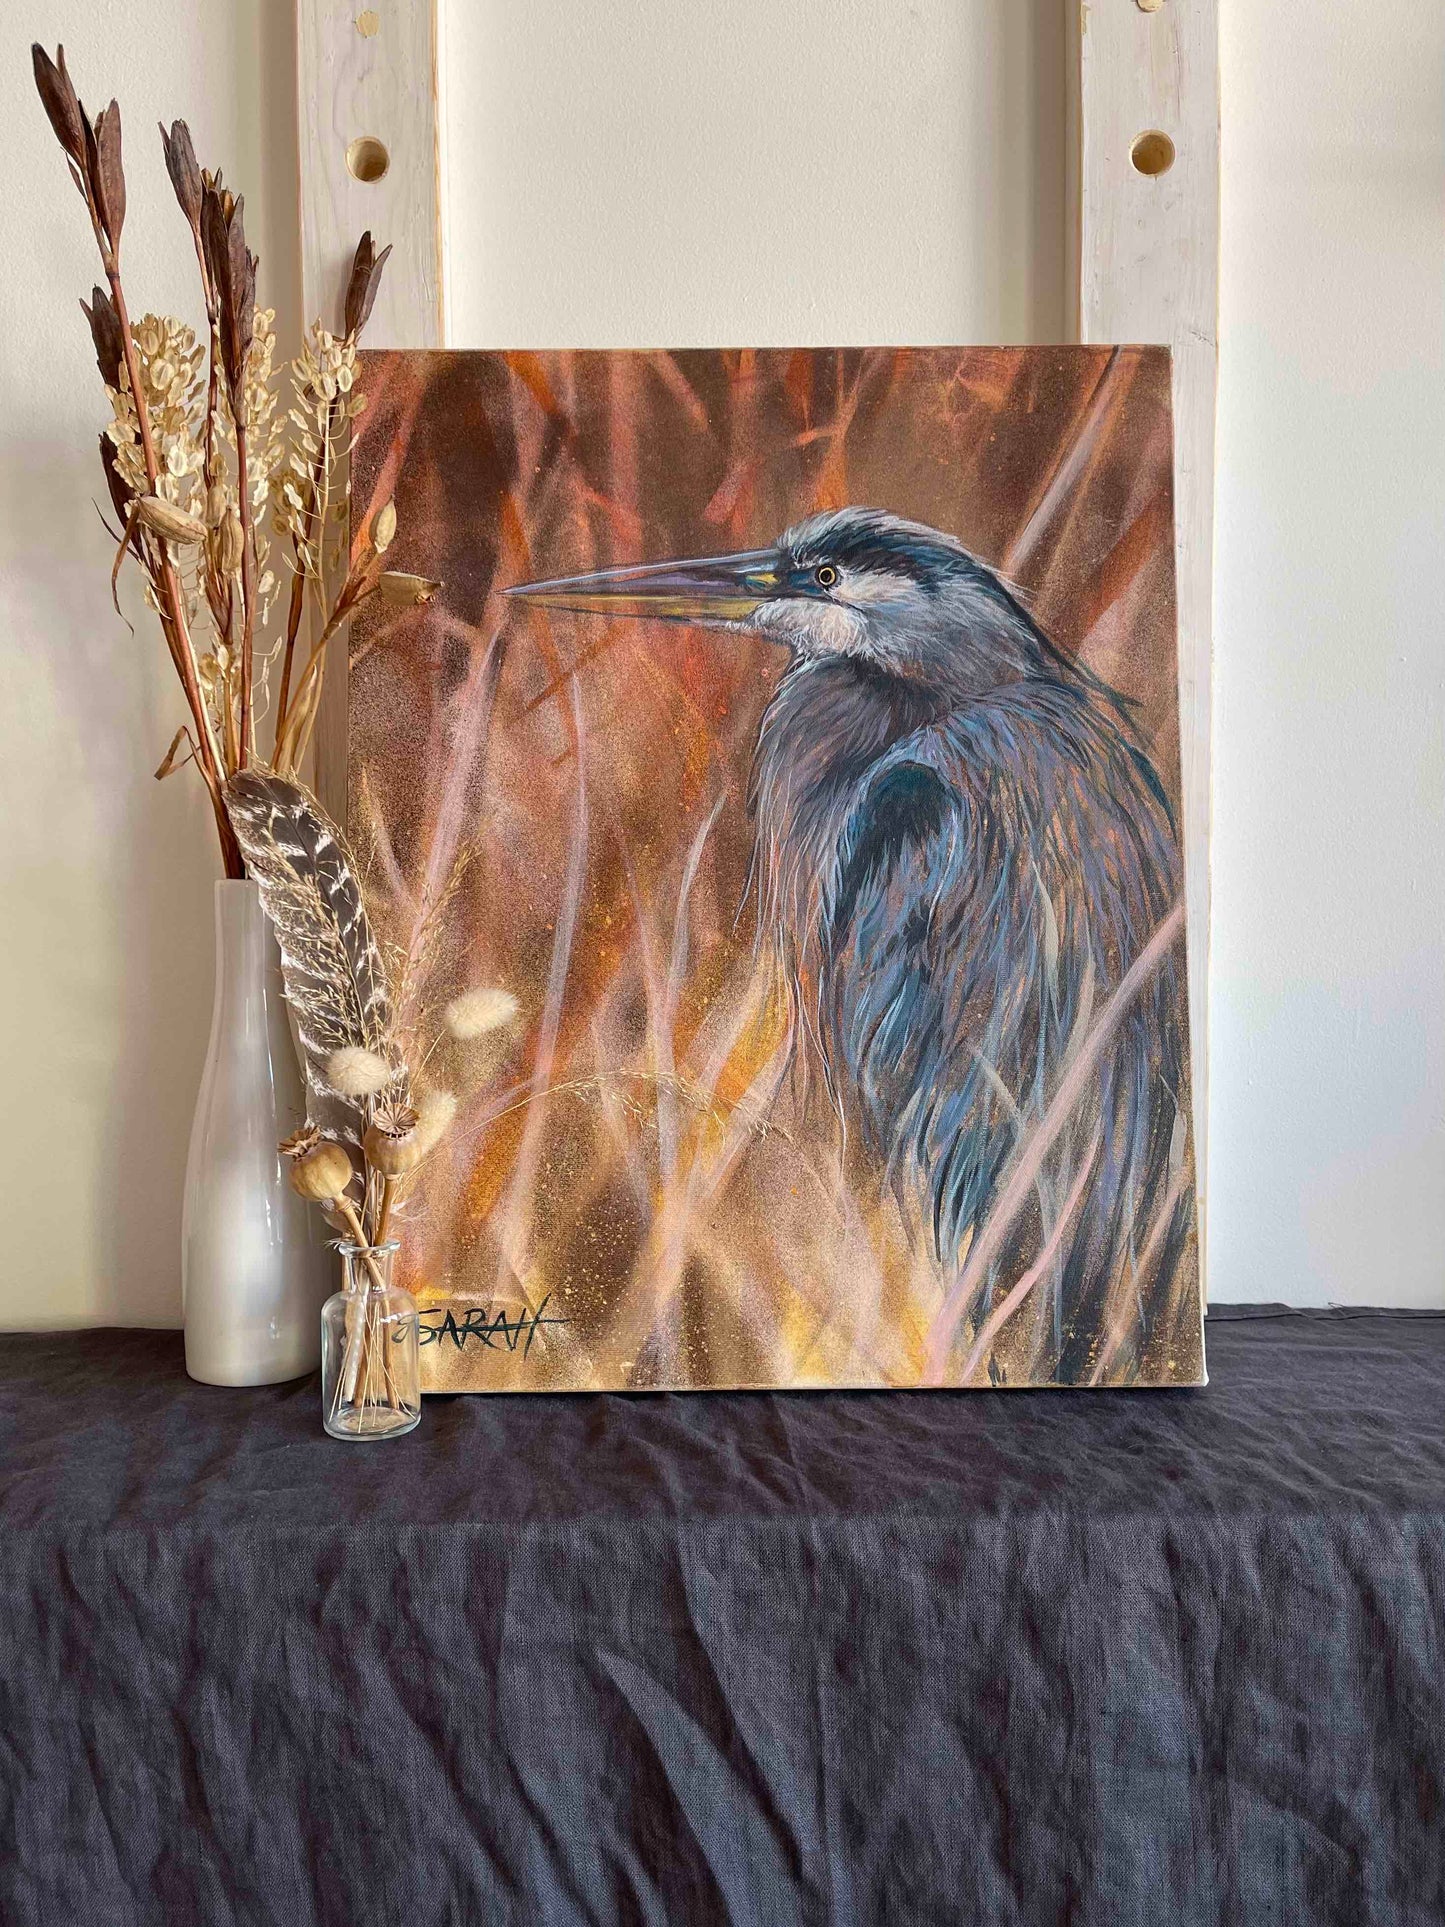 Heron in Fall Foliage | 16x20 | ORIGINAL SPRAY PAINT AND ACRYLIC PAINTING ON CANVAS | 21-72P